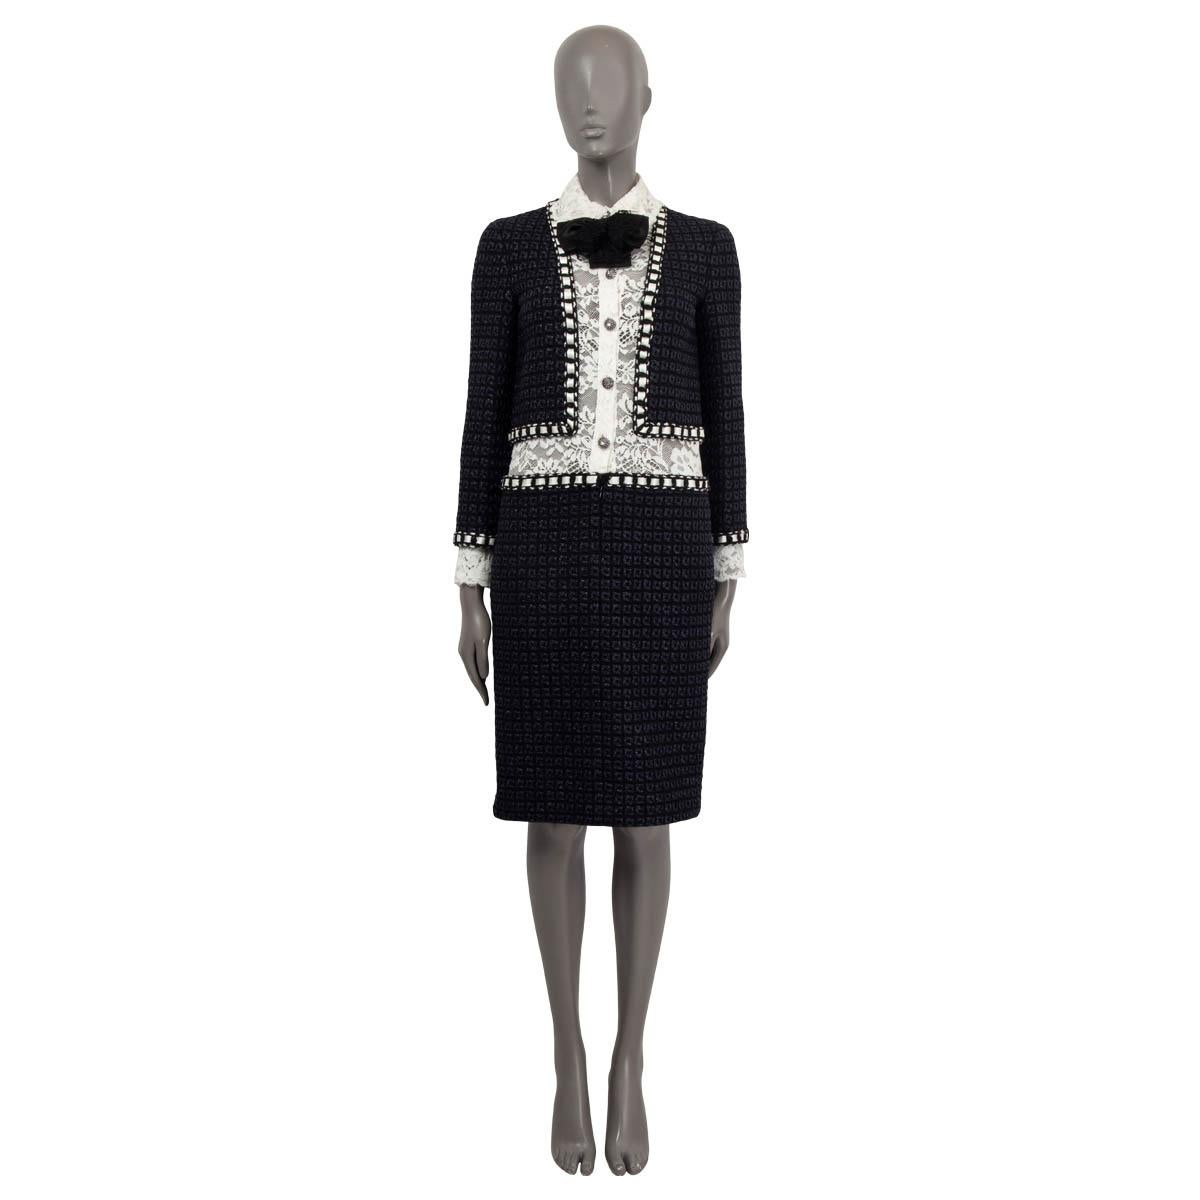 100% authentic Chanel Paris-Rome 2016 Metiers d'Art long sleeve boucle dress in navy, black and white wool (70%) and nylon (30%). Features lace details, a white satin trim and two sewn shut side slit pockets. Comes with buttoned, detachable lace